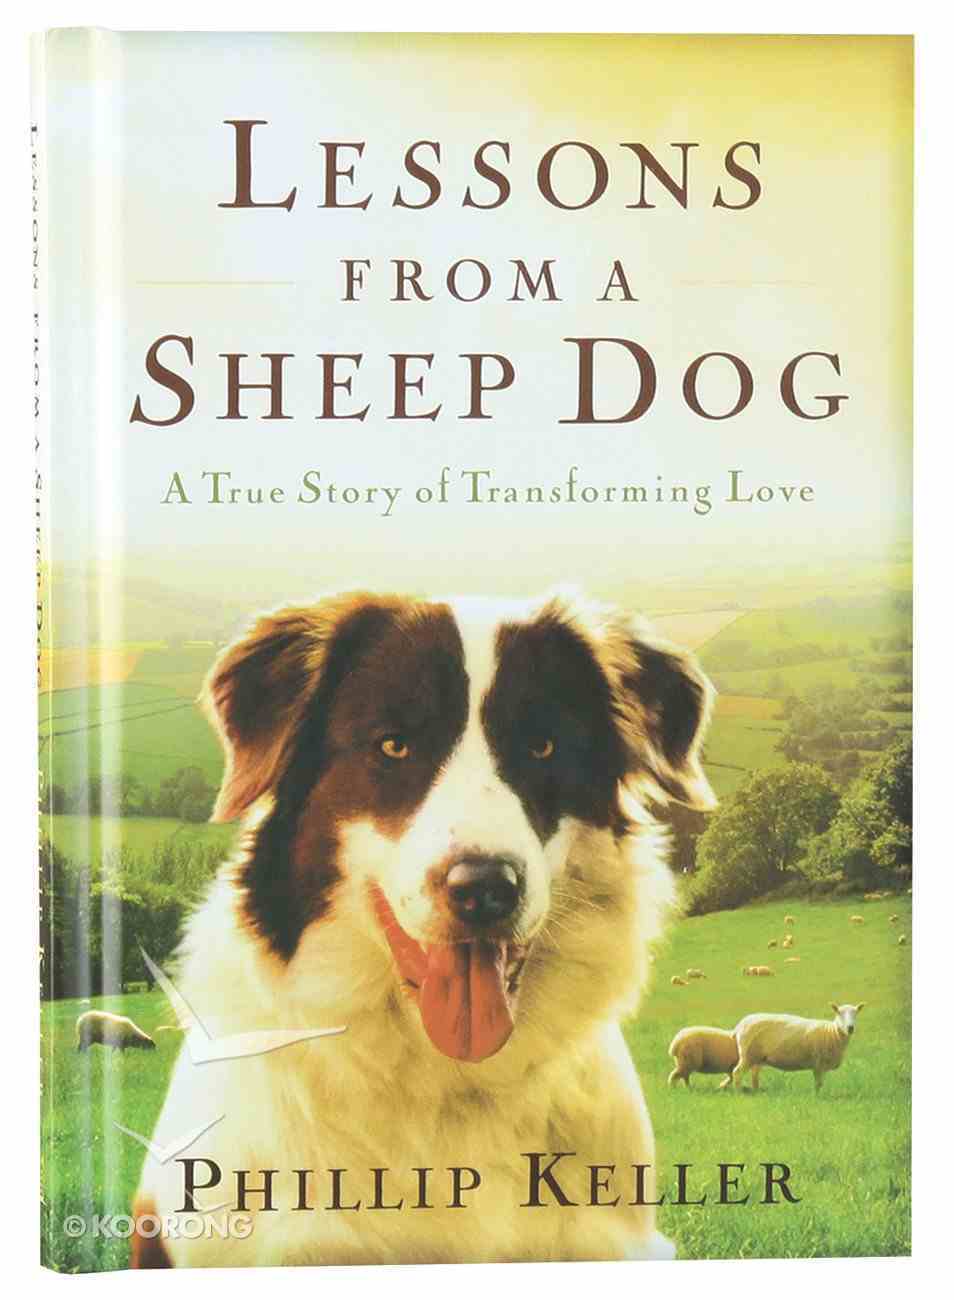 Lessons From a Sheepdog: A True Story of Transforming Love Hardback